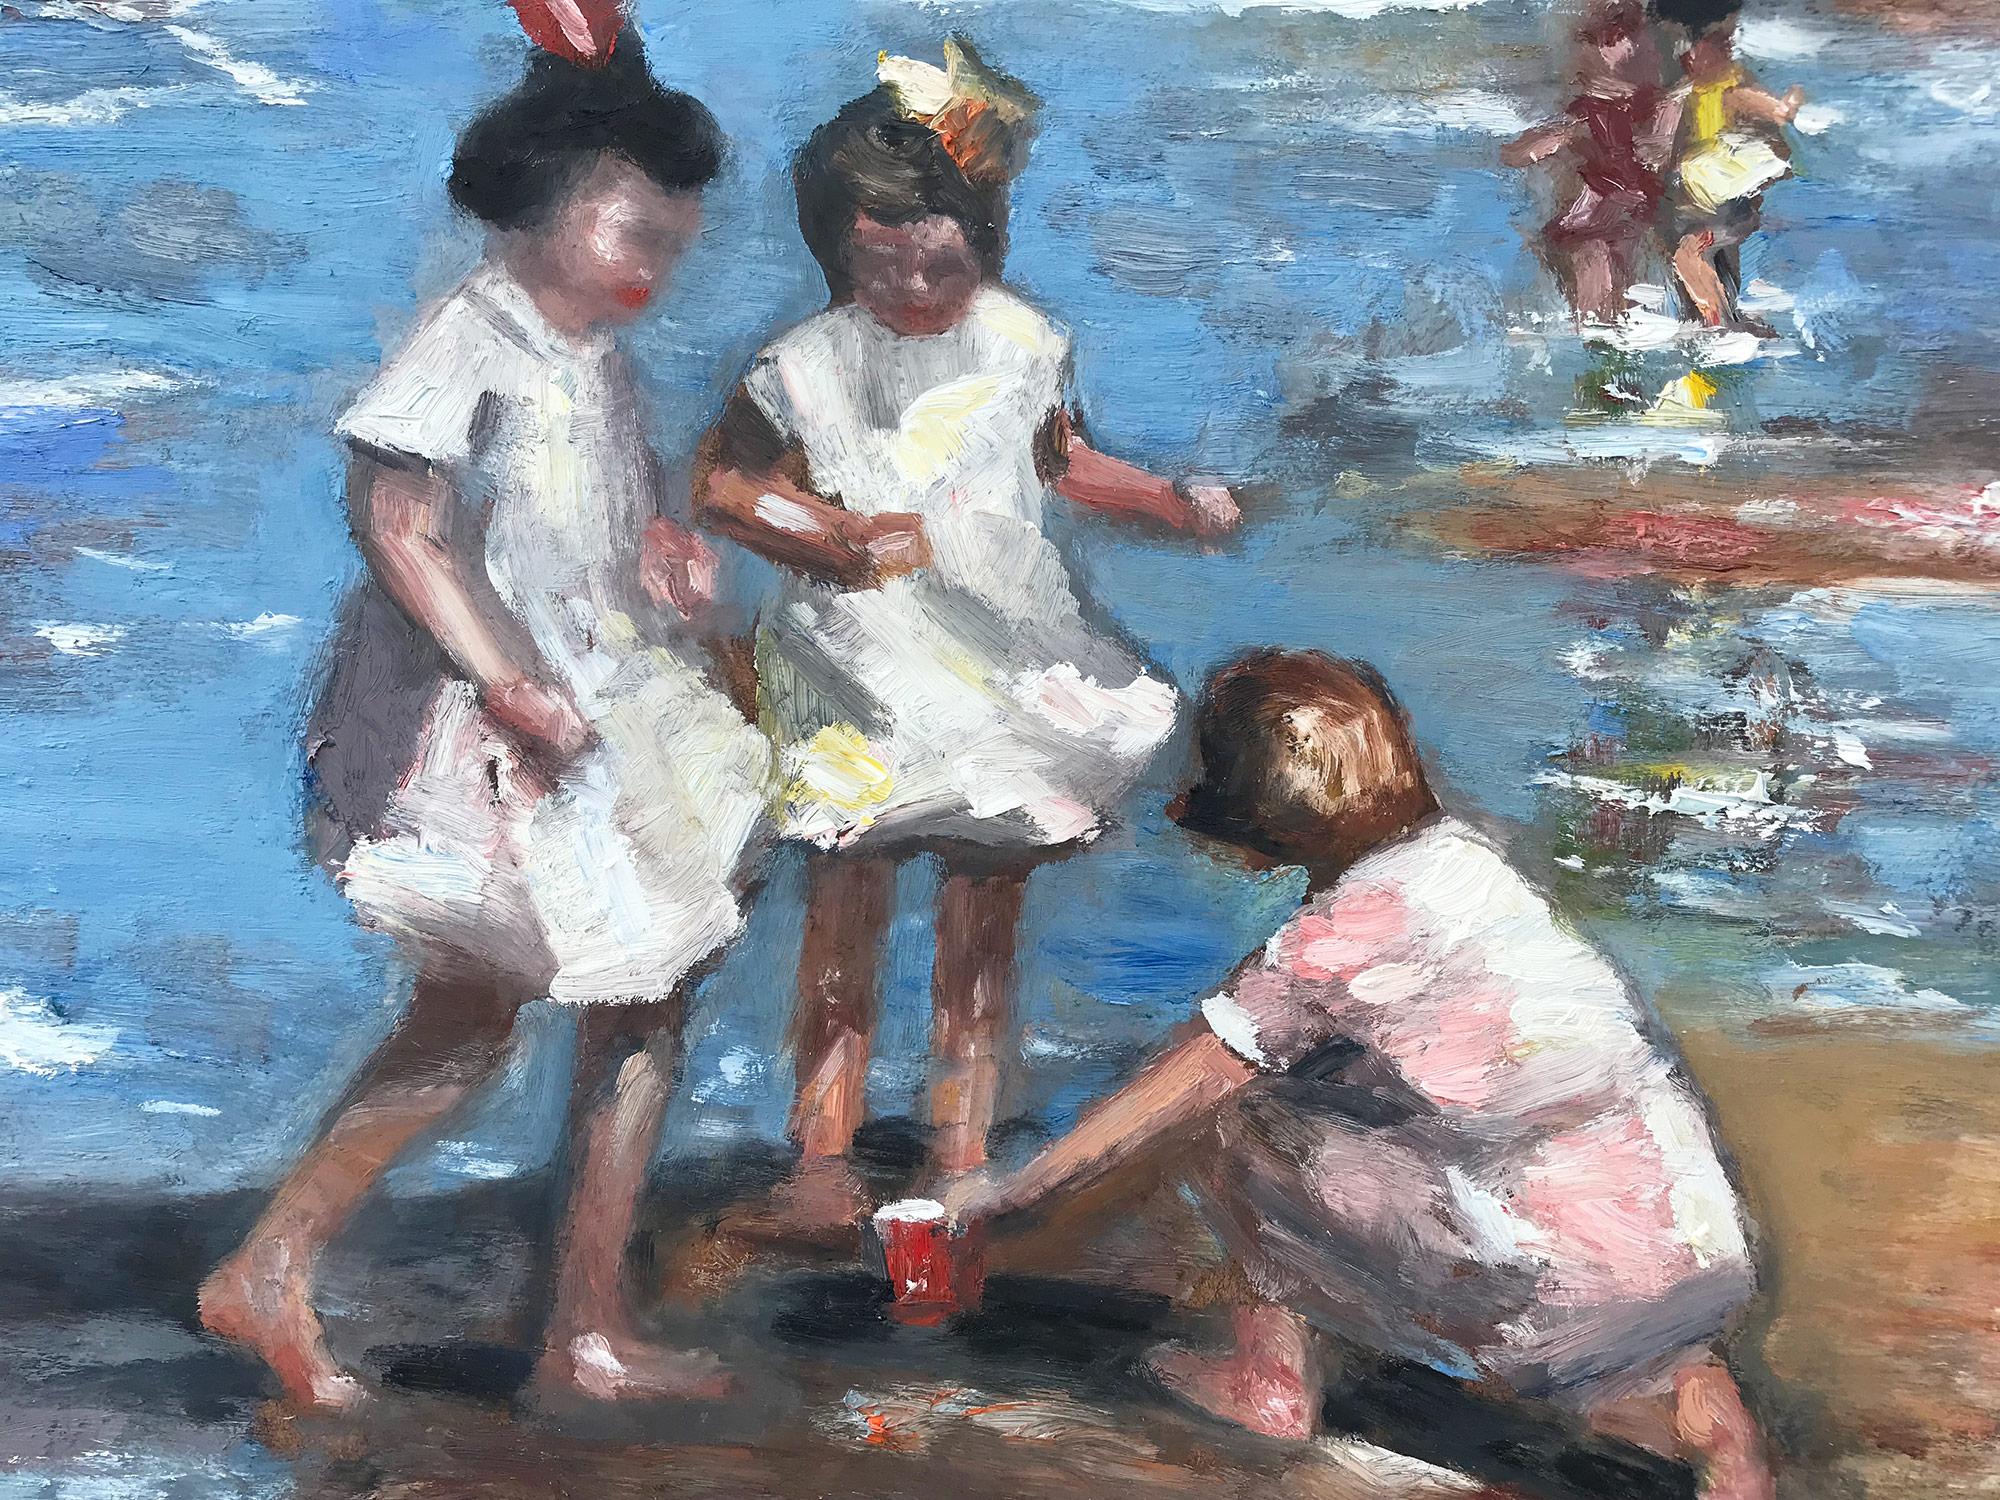 This painting depicts an impressionistic scene at the beach with beautiful brushwork and whimsical colors. The work is a following of Edward Potthast, capturing the beach and times of the early 20th Century similarly to his work. This piece comes